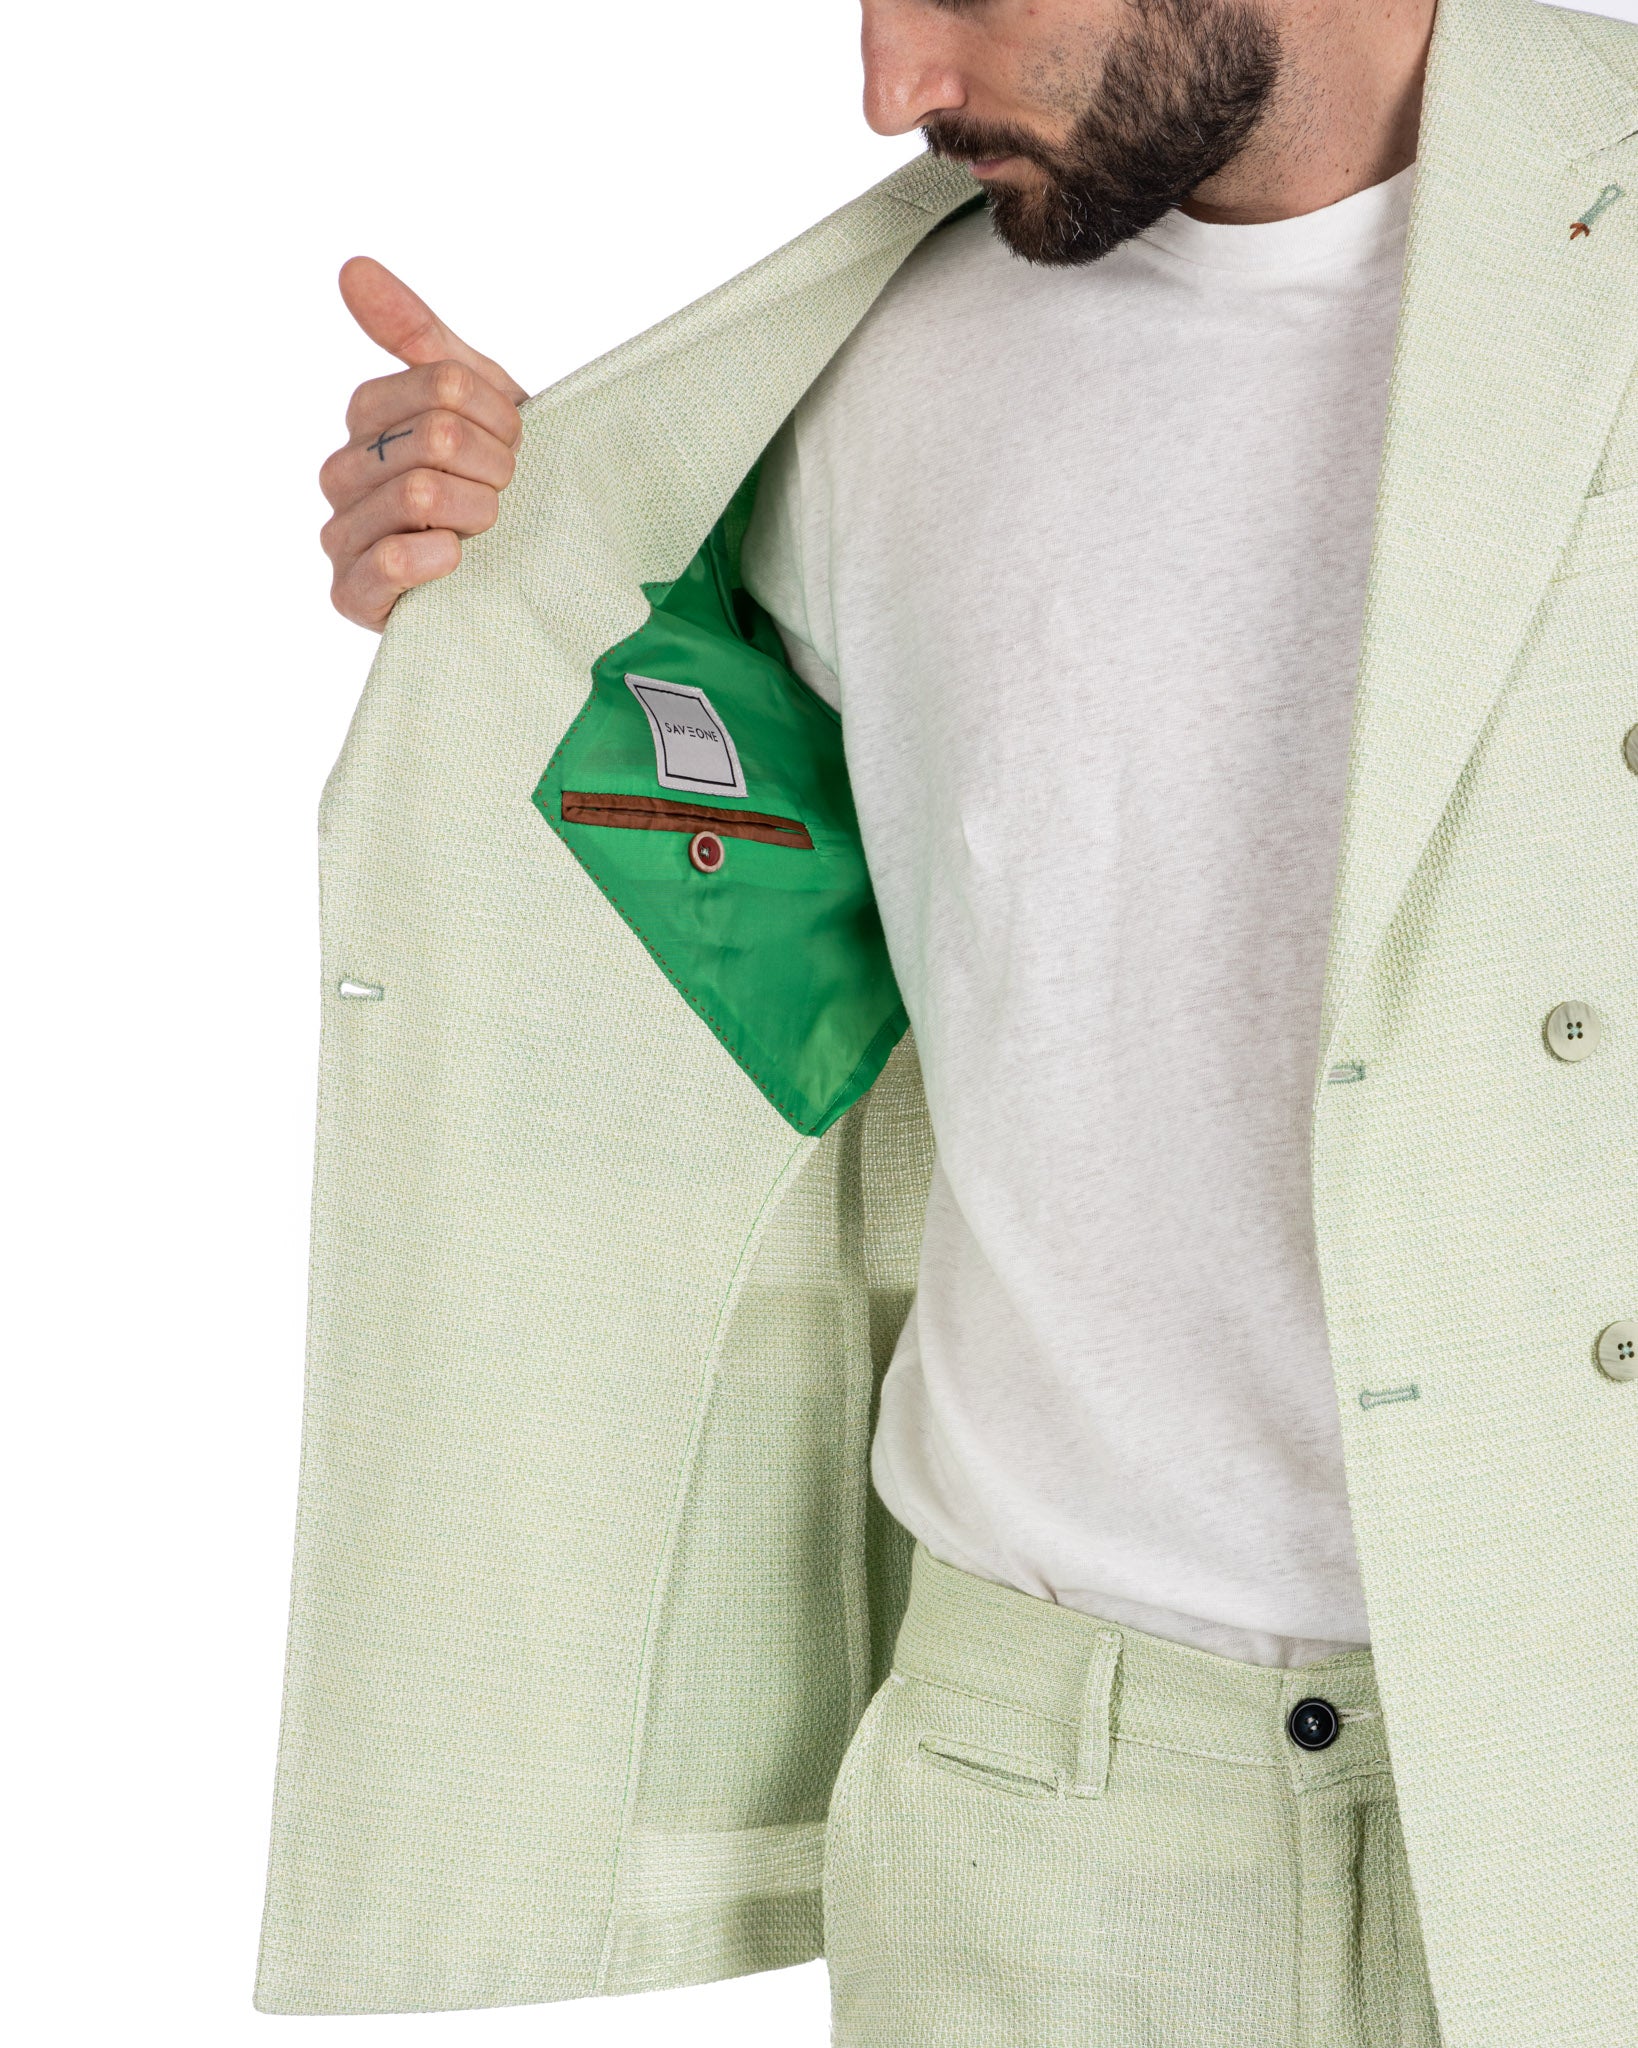 Leuca - green double-breasted jacket